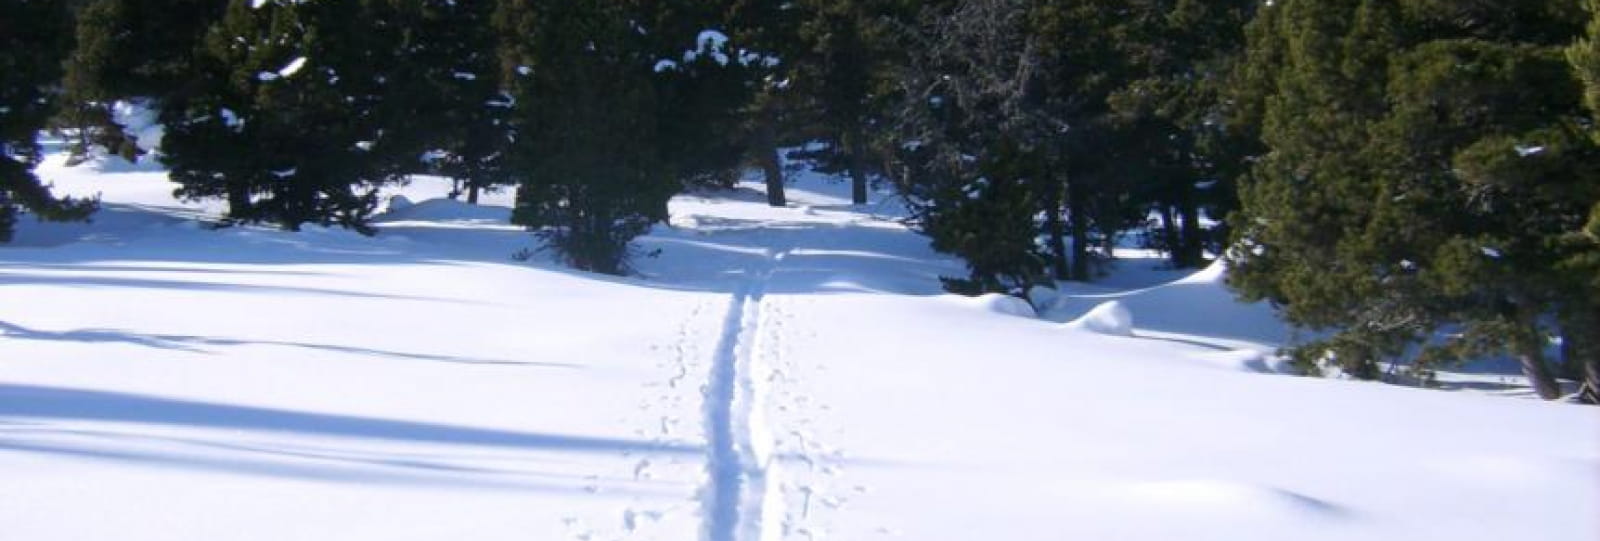 Nordic Skiing trek with a bivouac in a trapper's tent or in a mountain refuge on the Hauts plateaux du Vercors